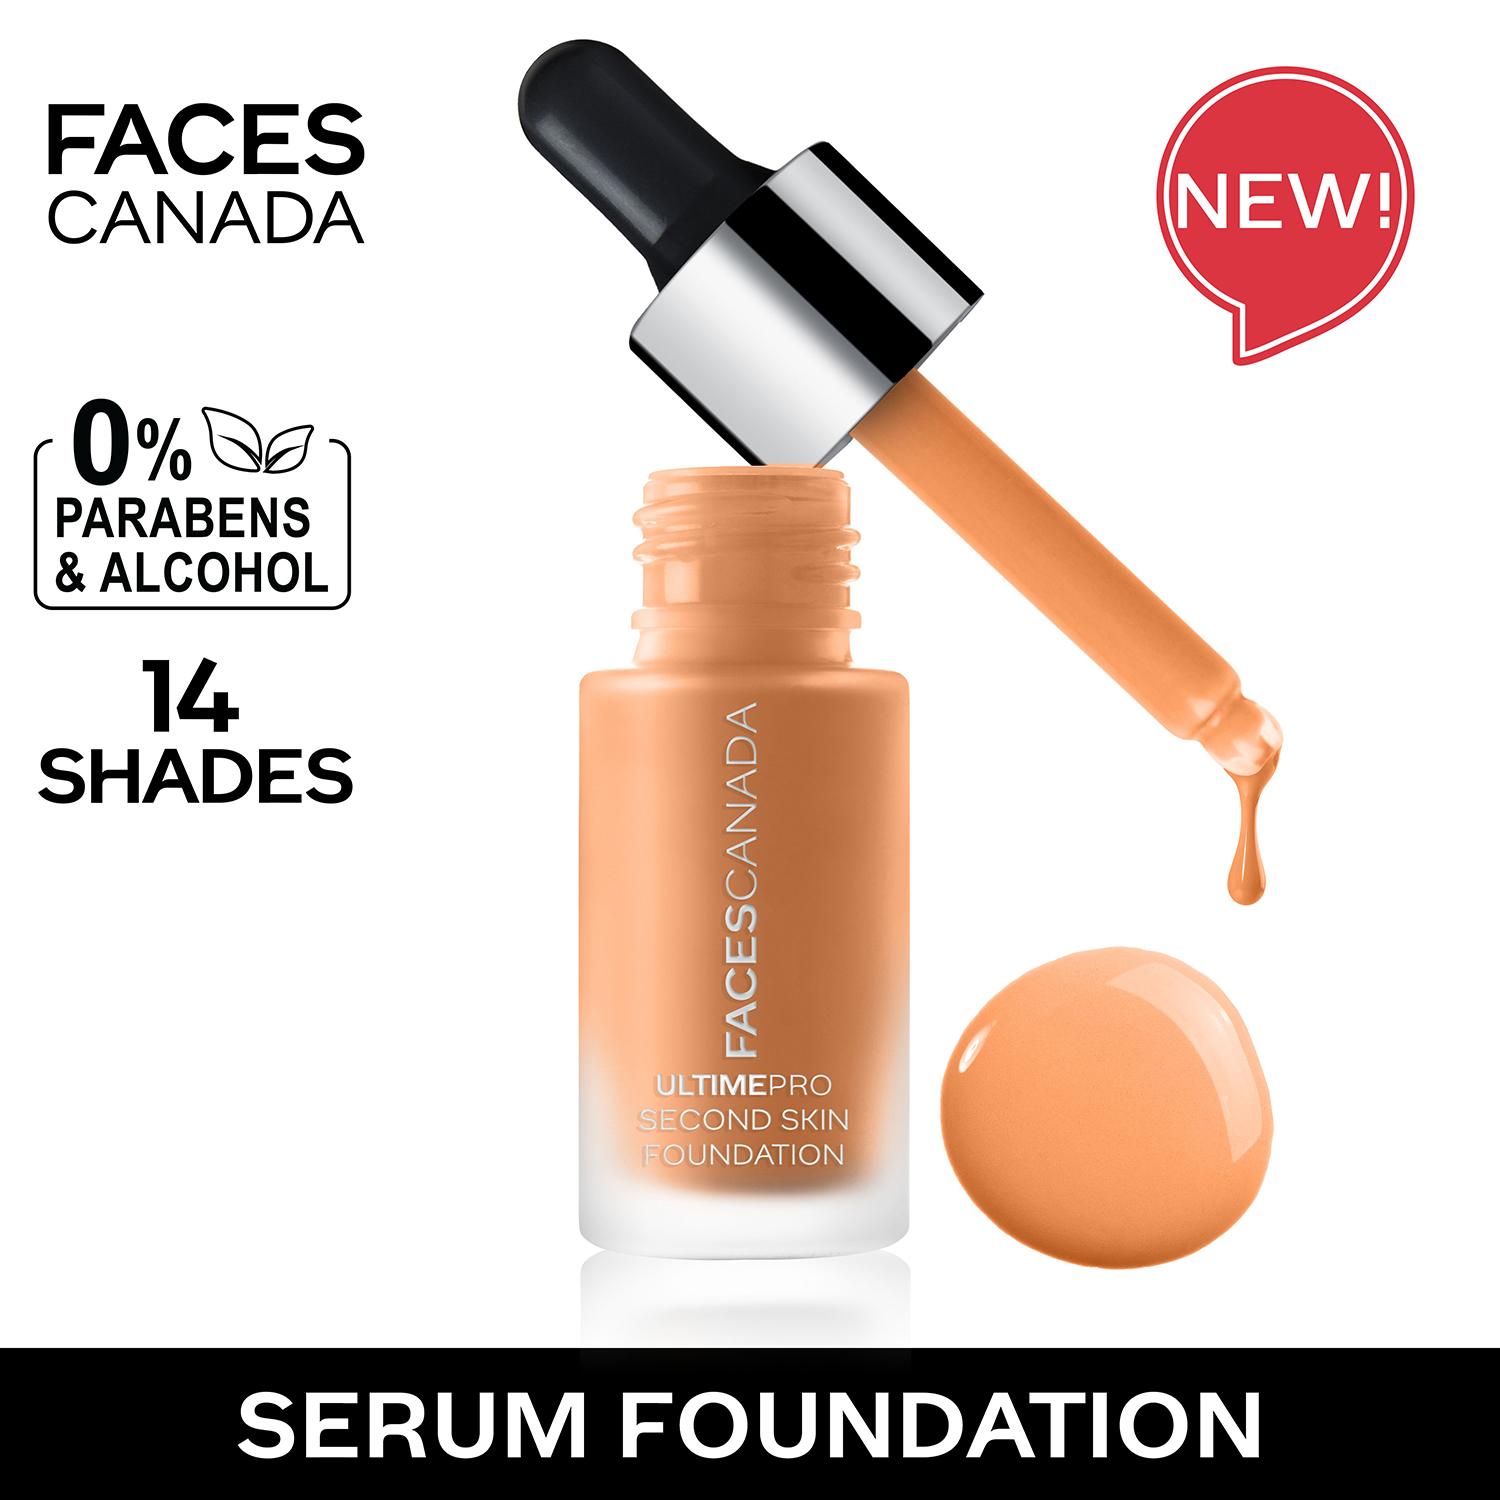 Faces Canada | Faces Canada Ultime Pro Second Skin Foundation - 32 Golden Beige (15ml)